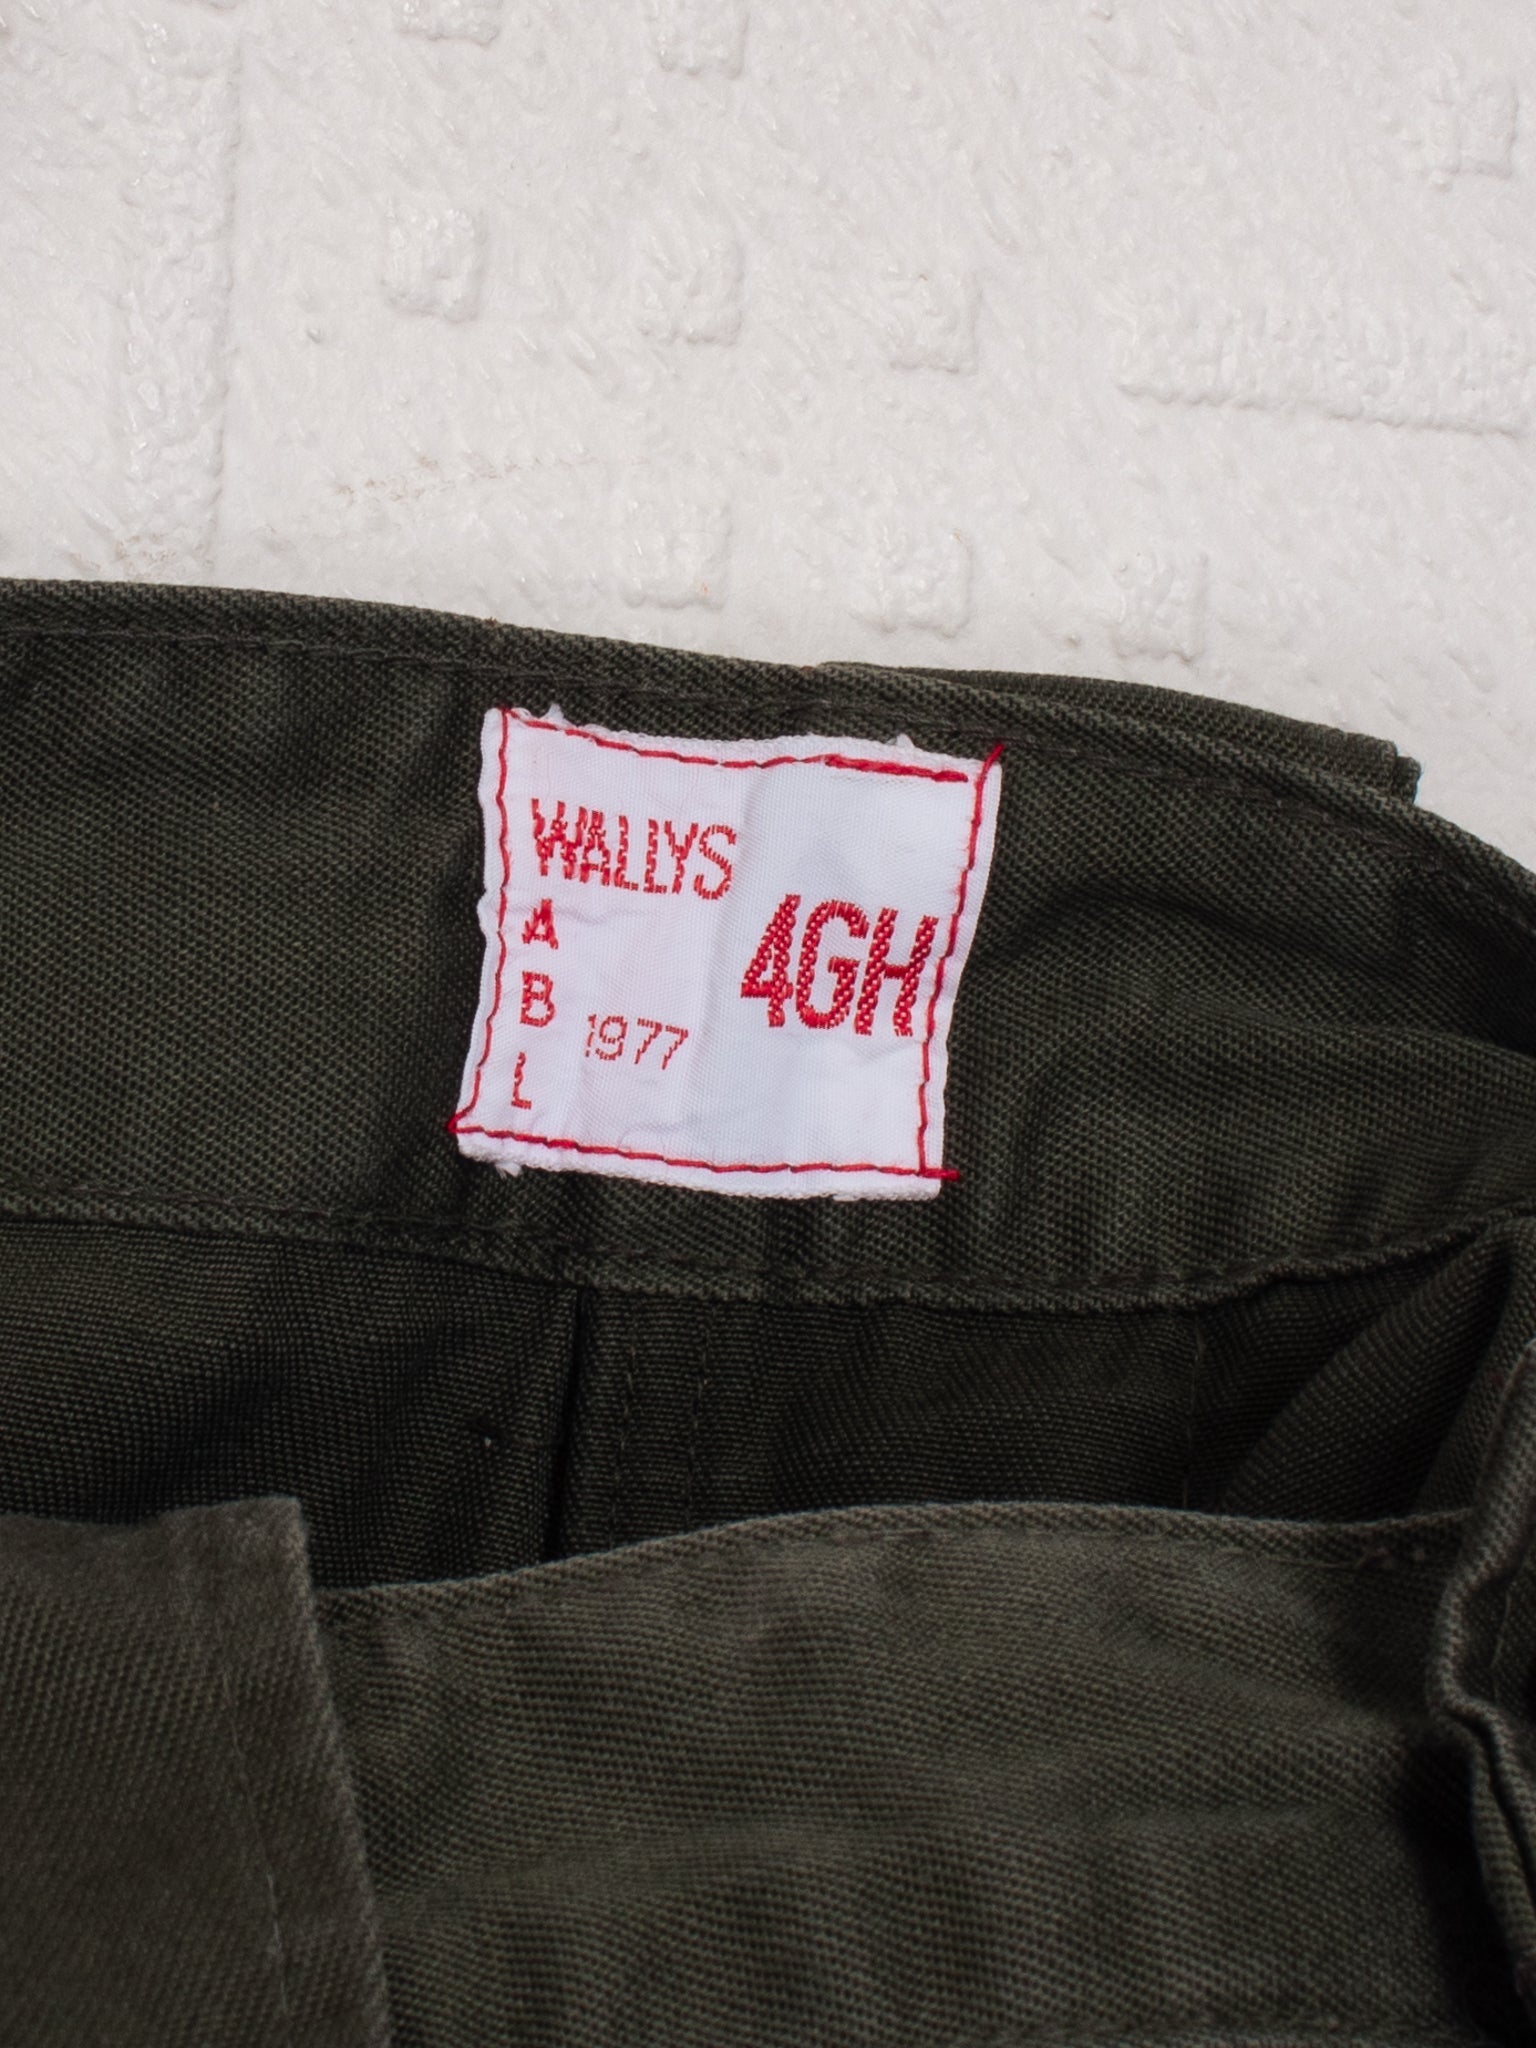 pants & trousers 1977 ABL Army Trousers - W32